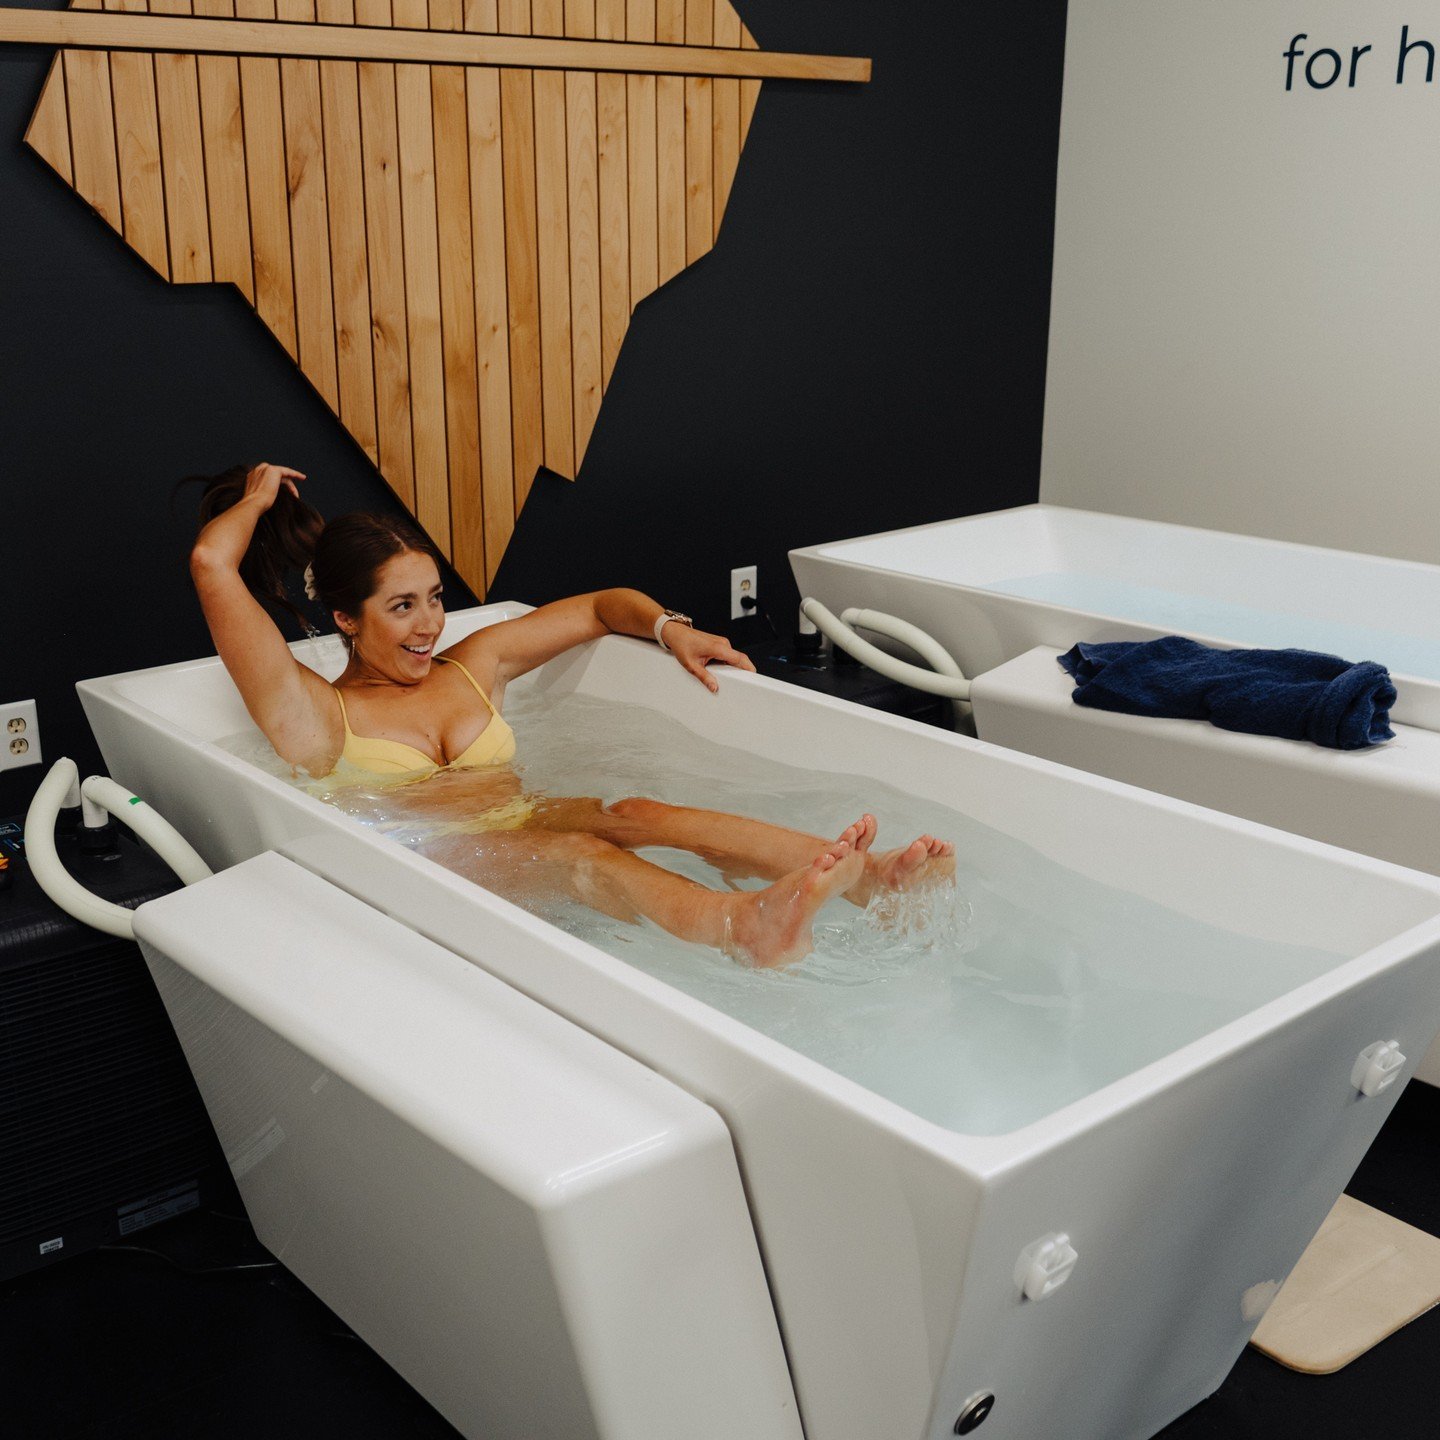 ❄️ Cool Down, Power Up ❄️
Take the plunge with Cold Water Therapy to boost your recovery and immune health. Visit RESET studio inside @vrtxfitness and book your session now!

#ColdPlungeTherapy #BoostImmunity #CryoMethod #RESET #missoulamt